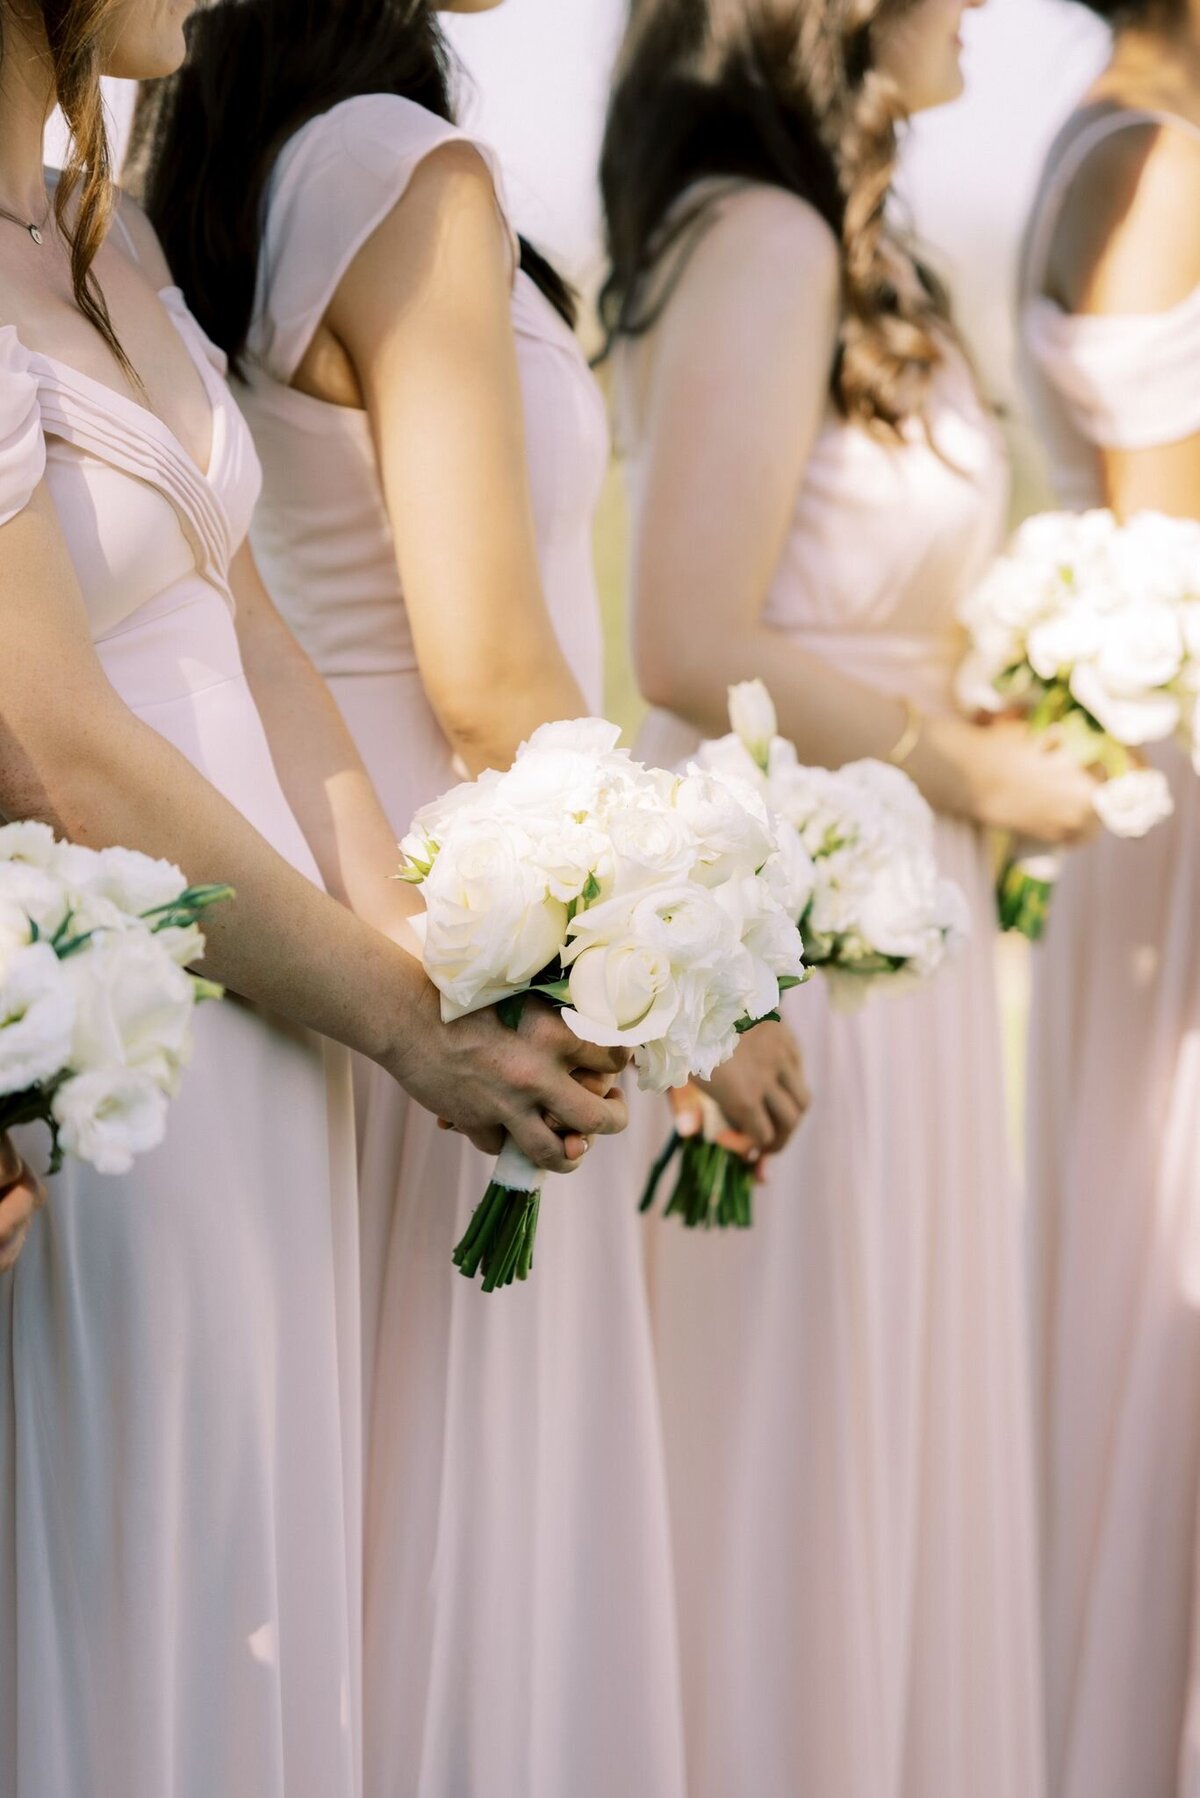 Each bridesmaid had her own bouquet of white flowers for this elegant wedding.